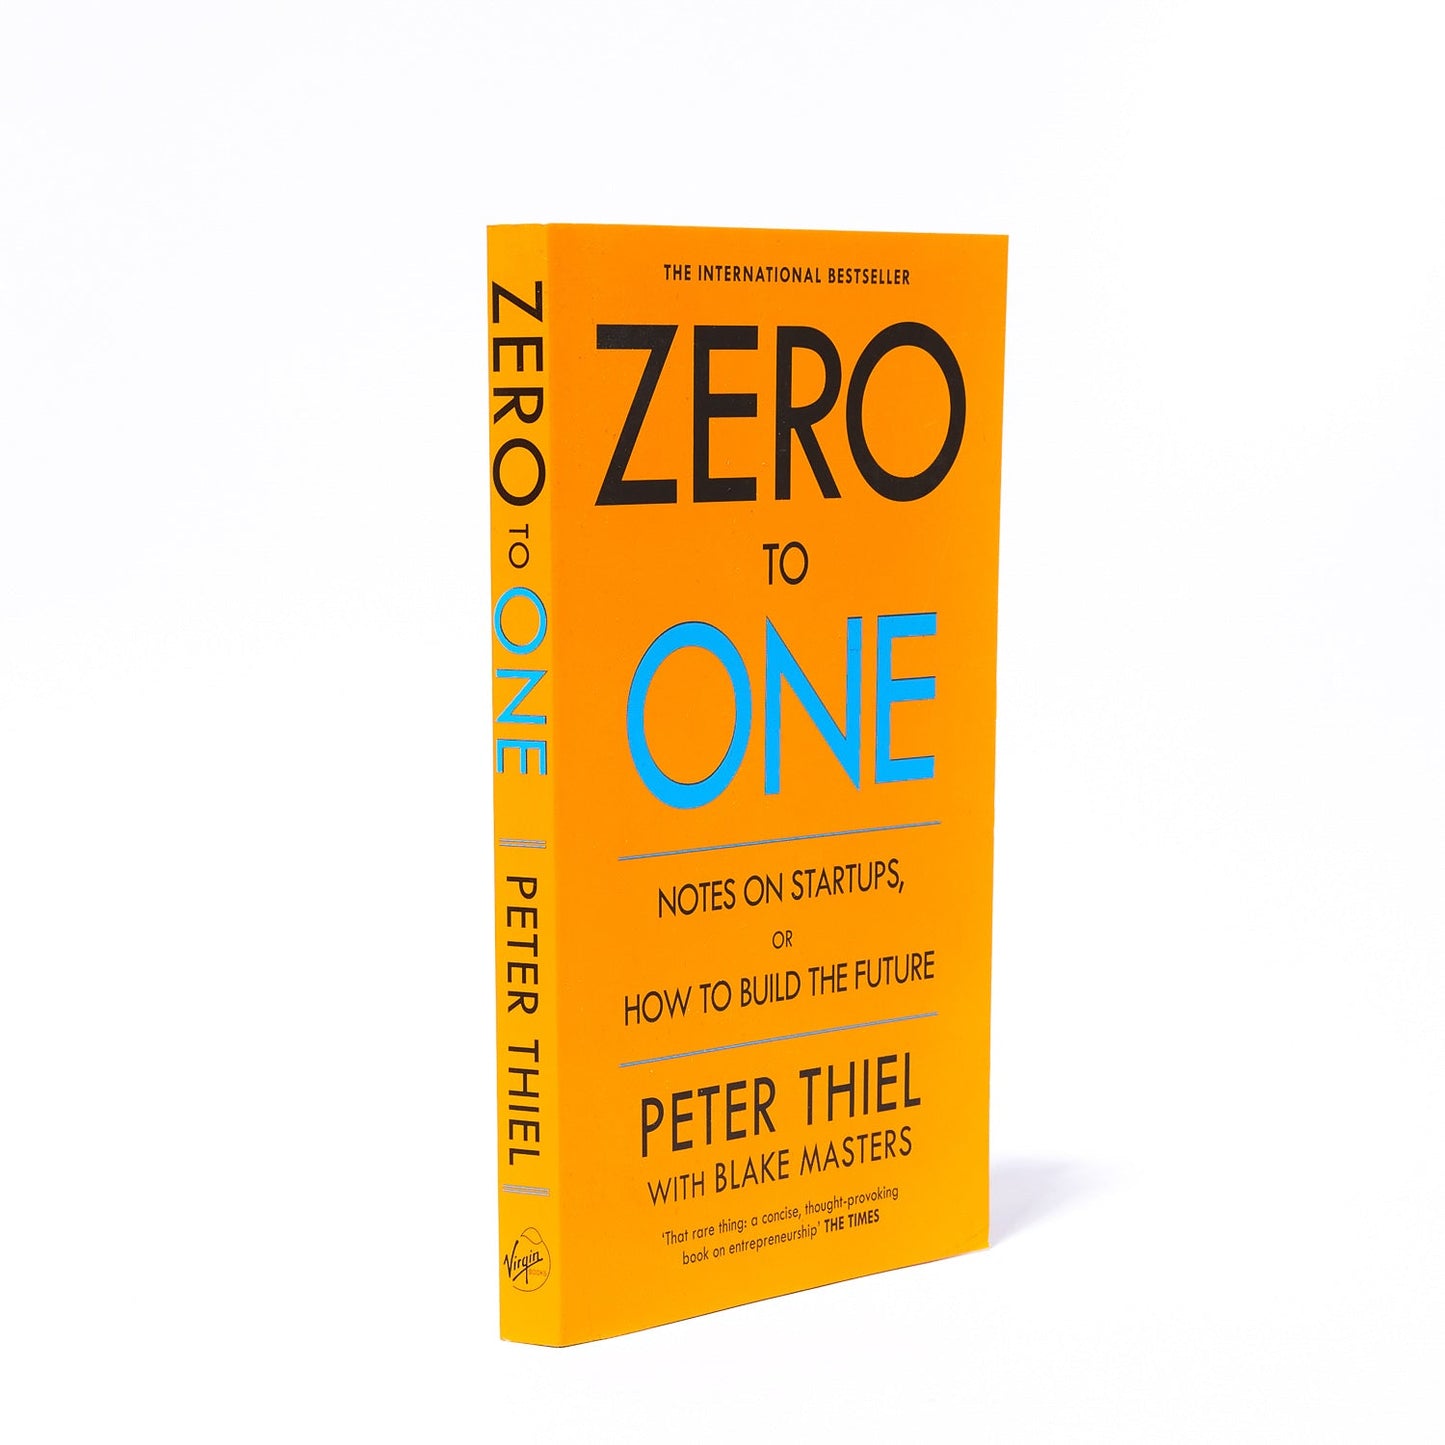 ZERO TO ONE: NOTES ON START UPS OR HOW TO BUILD THE FUTURE